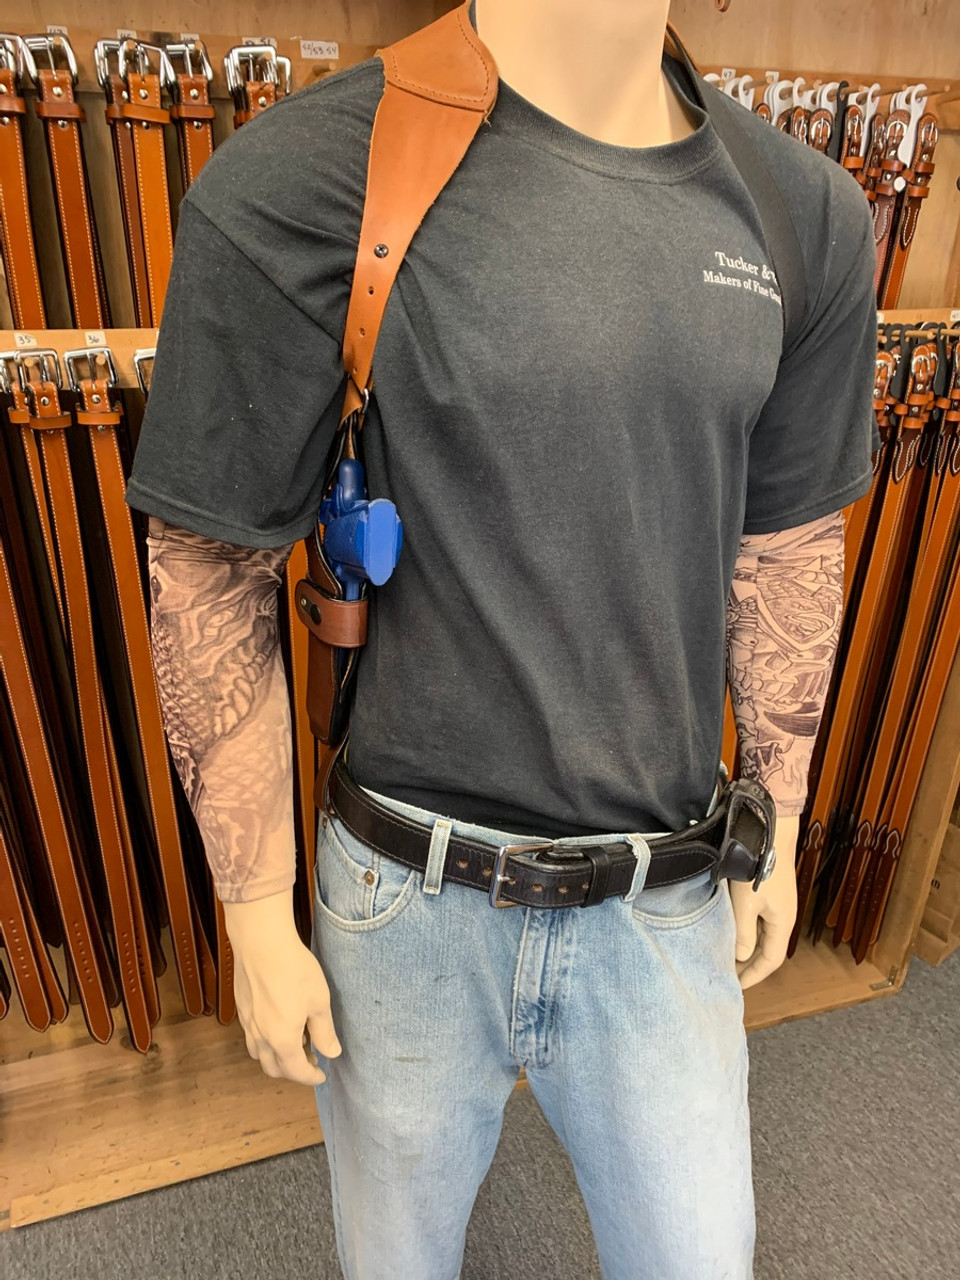 Wandering Away From Your Chest Holster Would You Suggest?, 40% OFF